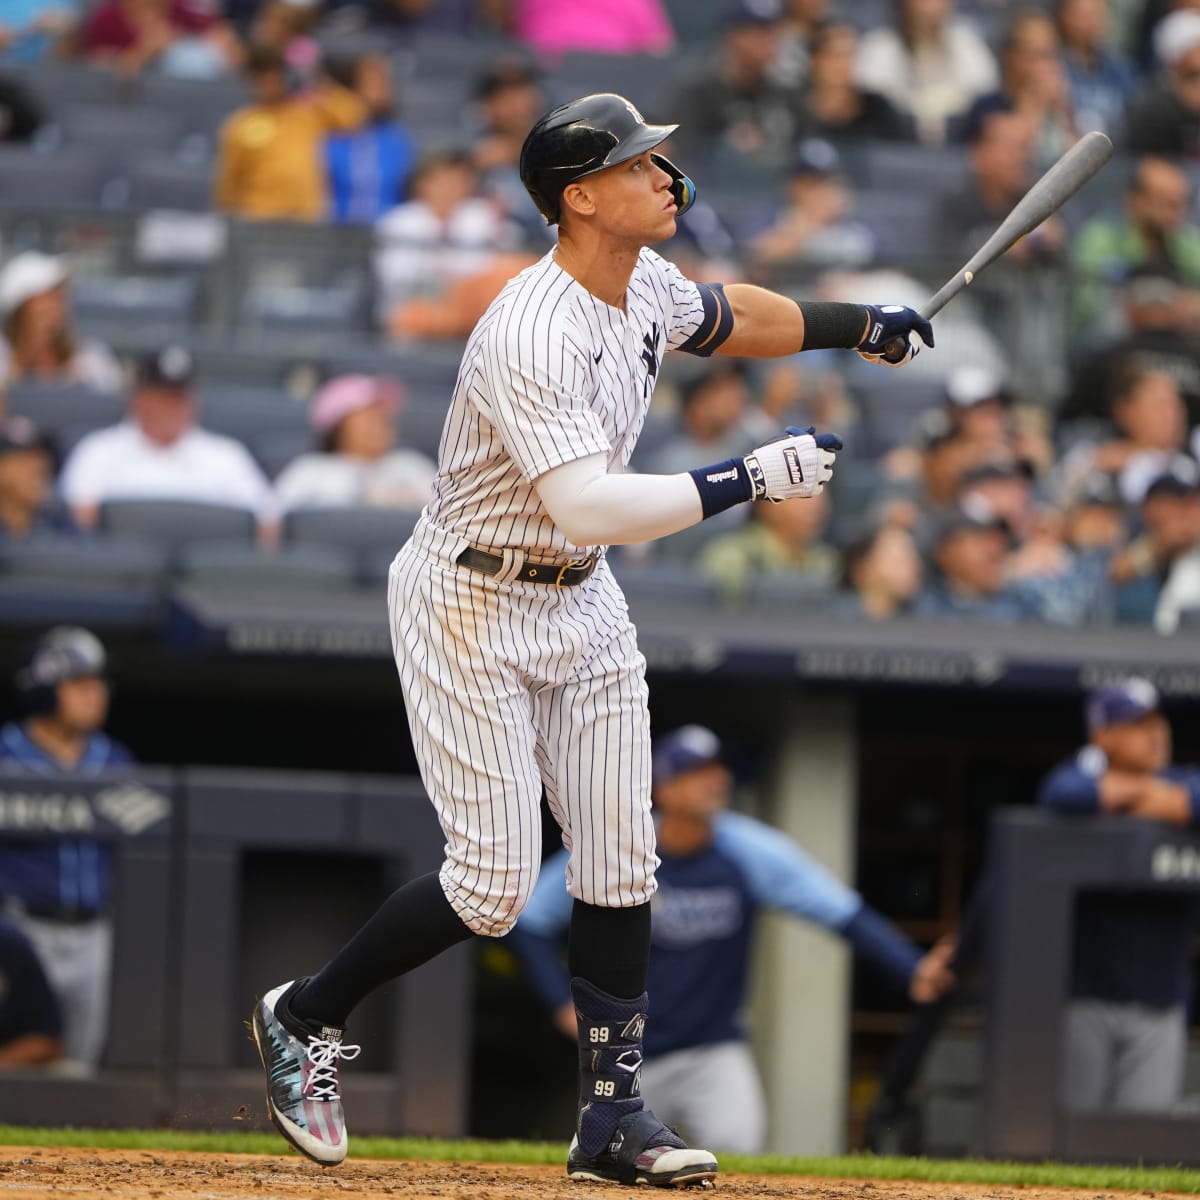 Aaron Judge makes his Bronx return and now Yankees have a tough